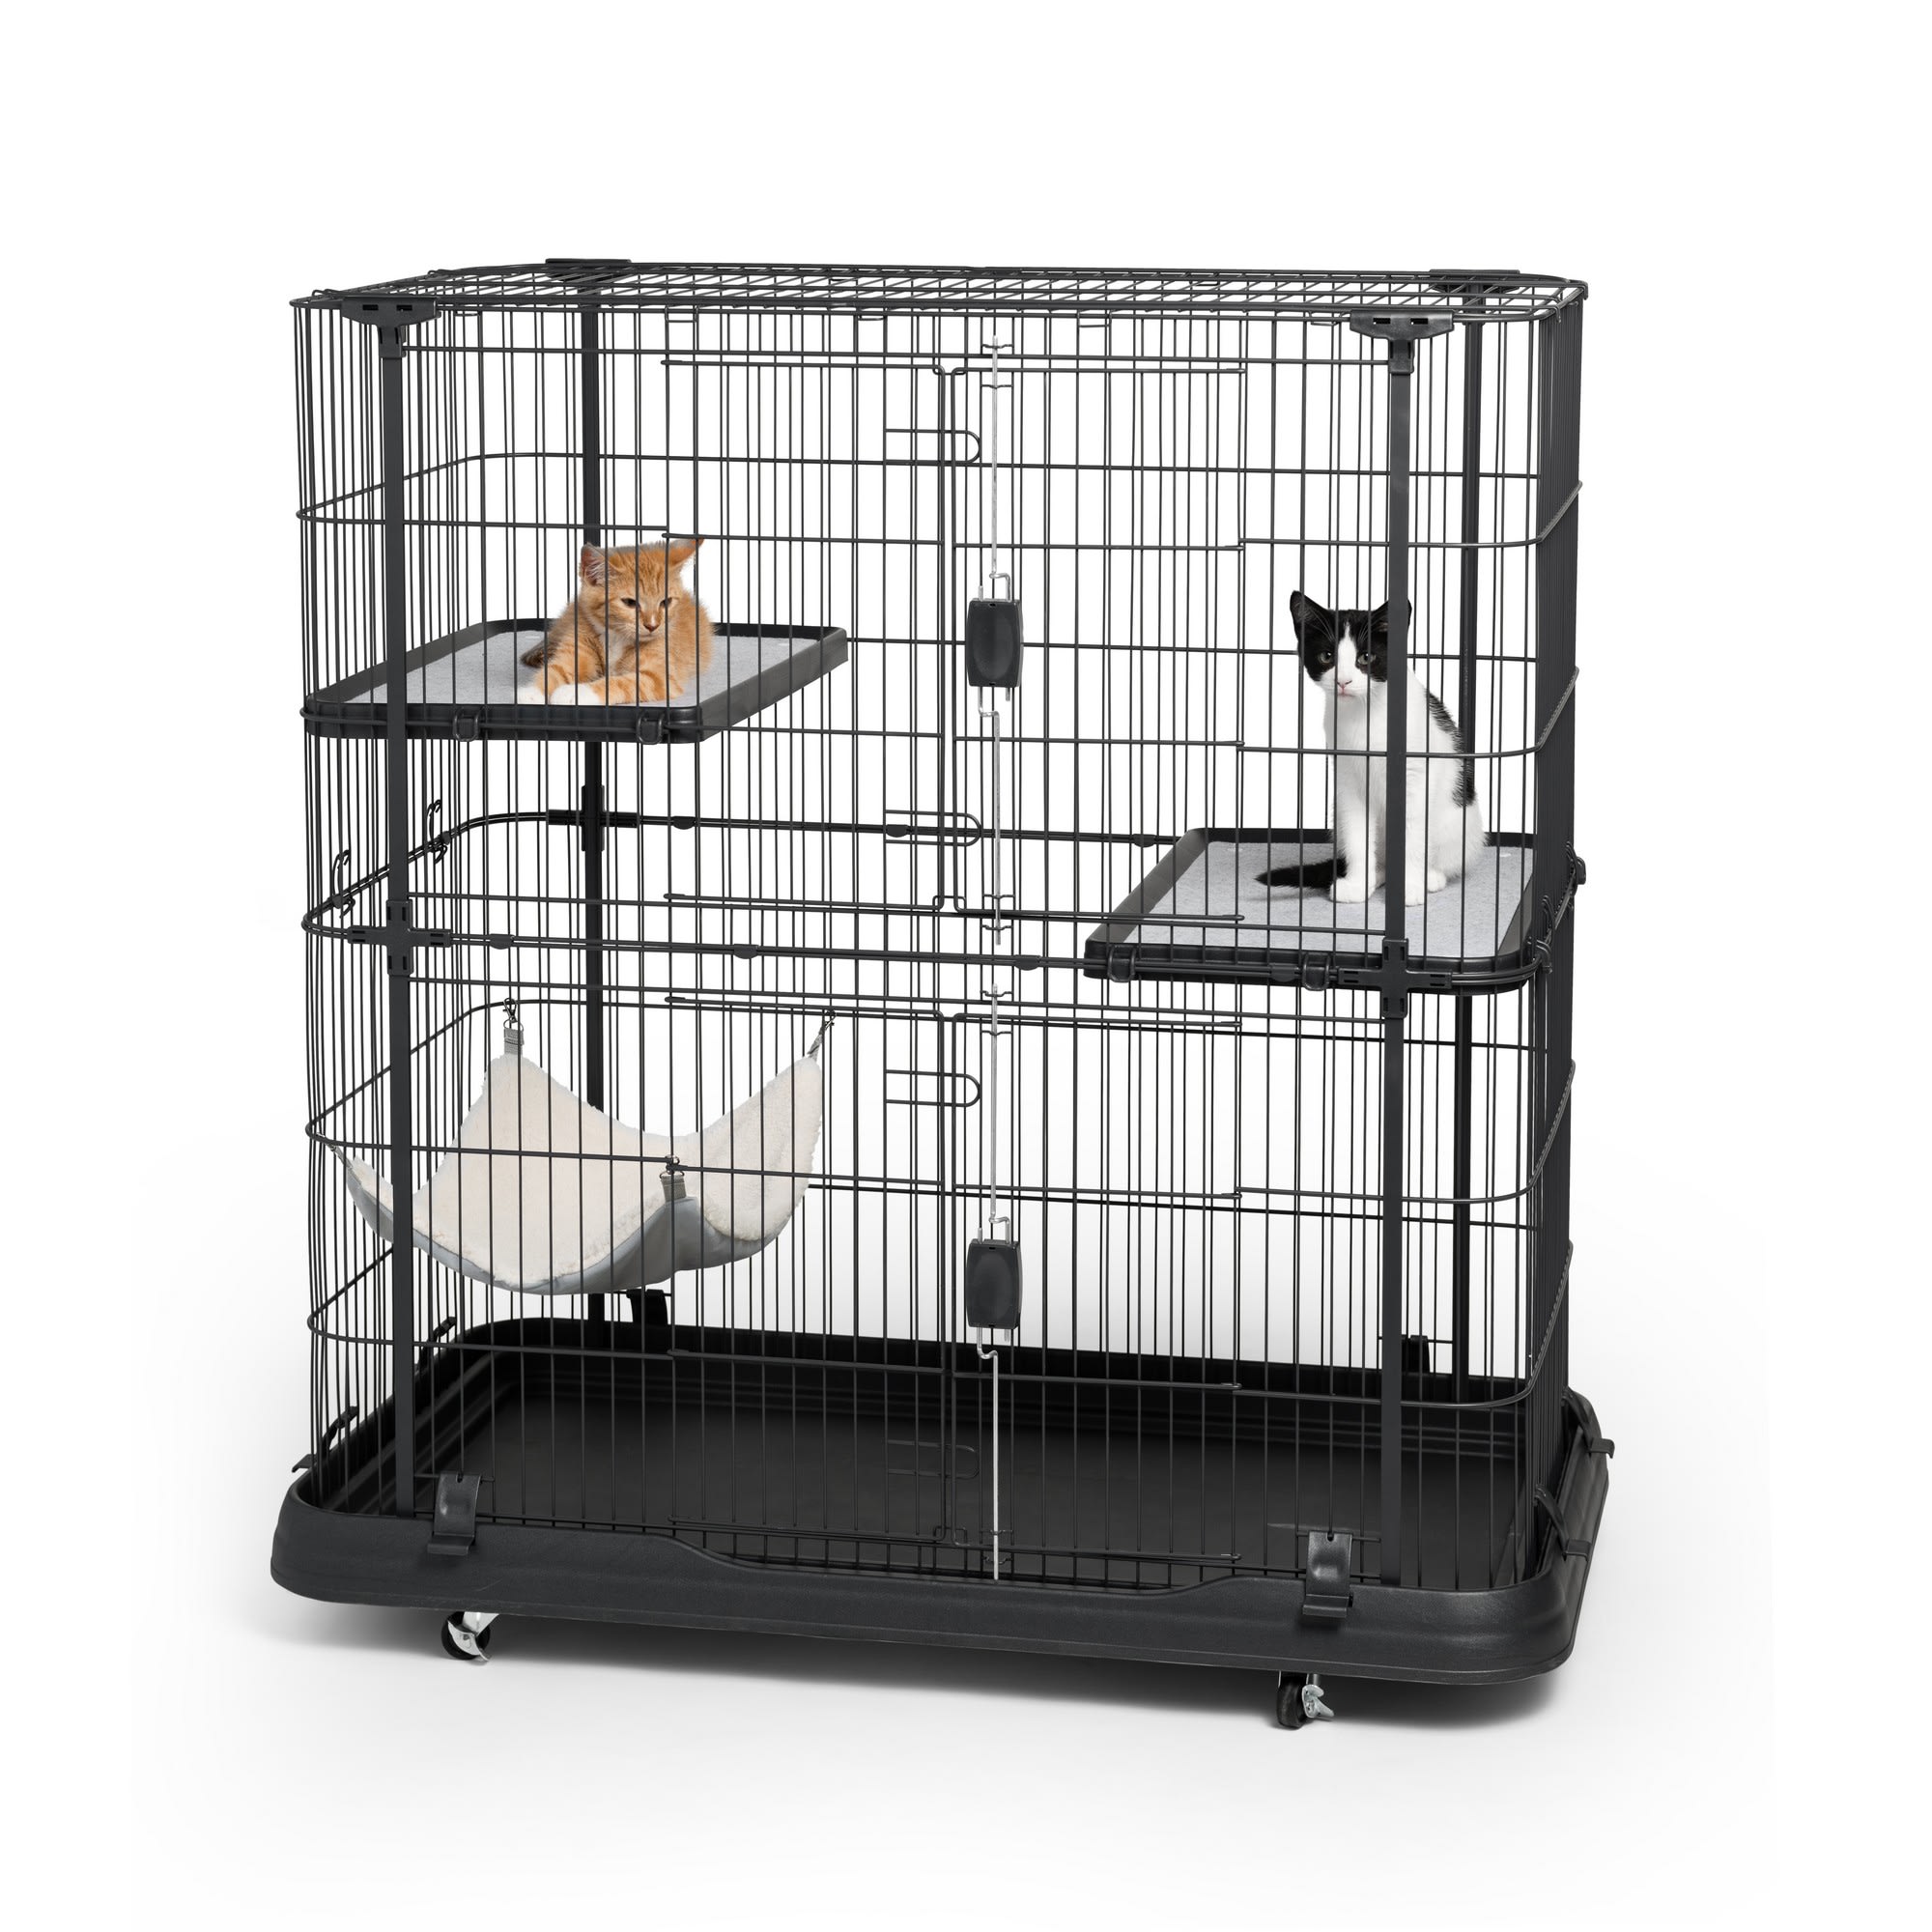 Prevue Pet Products 7501 Deluxe 3 Level Cat Home | Petco